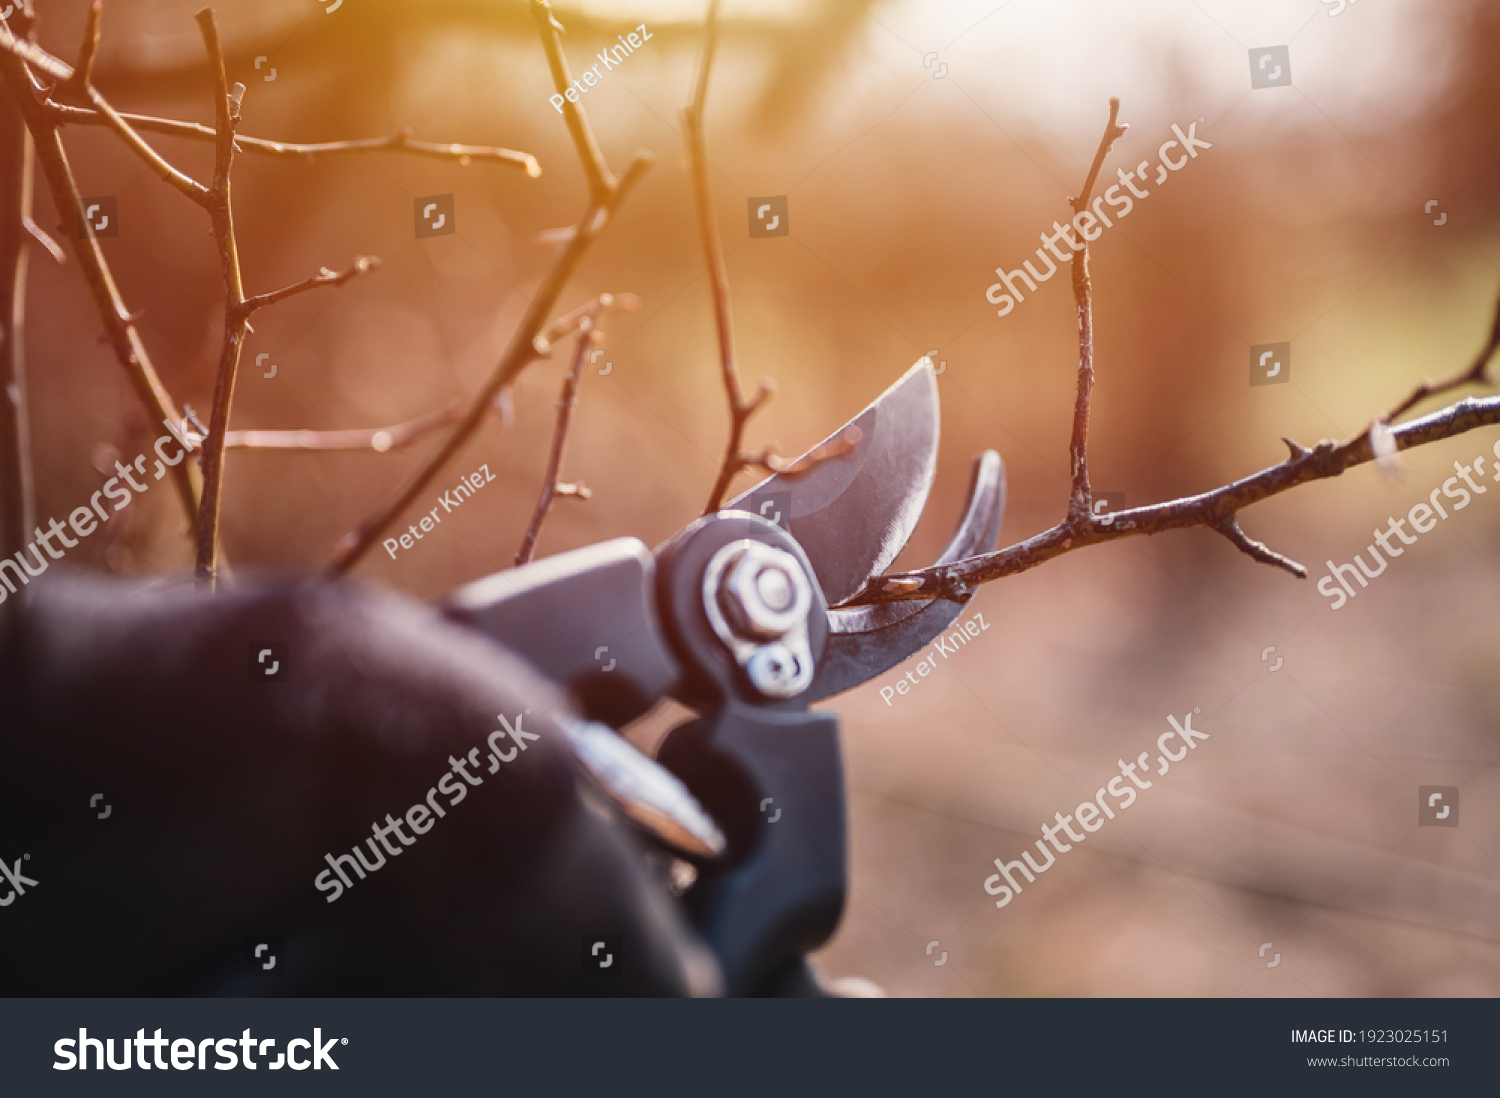 Garden work of spring. Farmer hand prunes and cuts branches of a tree in the garden with pruning shears or secateurs in spring. Man pruning tree with clippers. Spring cut tree close up. #1923025151